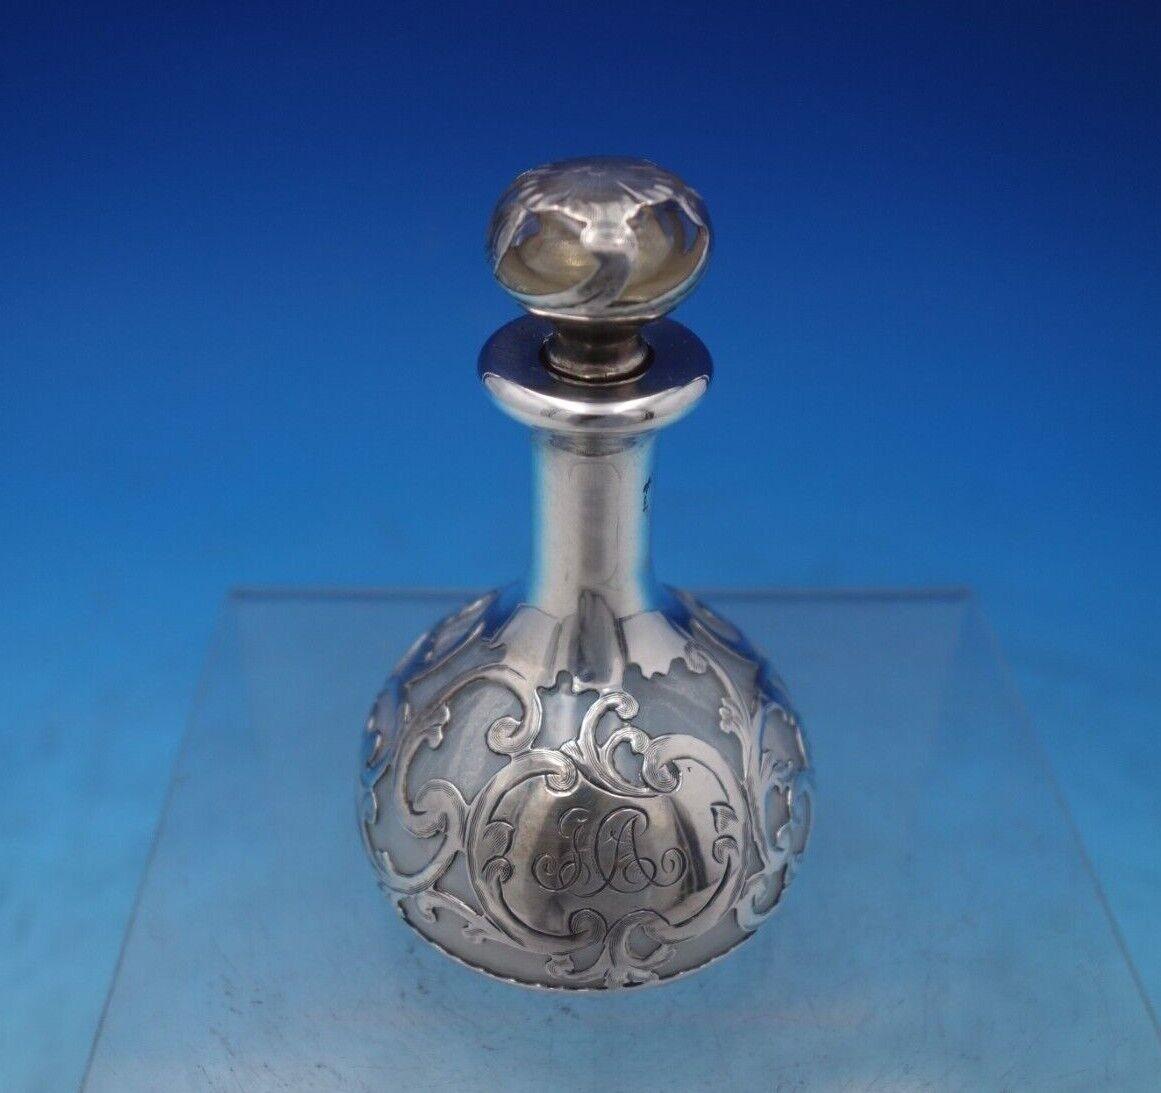 Gorham

Pretty Gorham clear glass perfume bottle with silver overlay marked #D236. This bottle measures 3 5/8